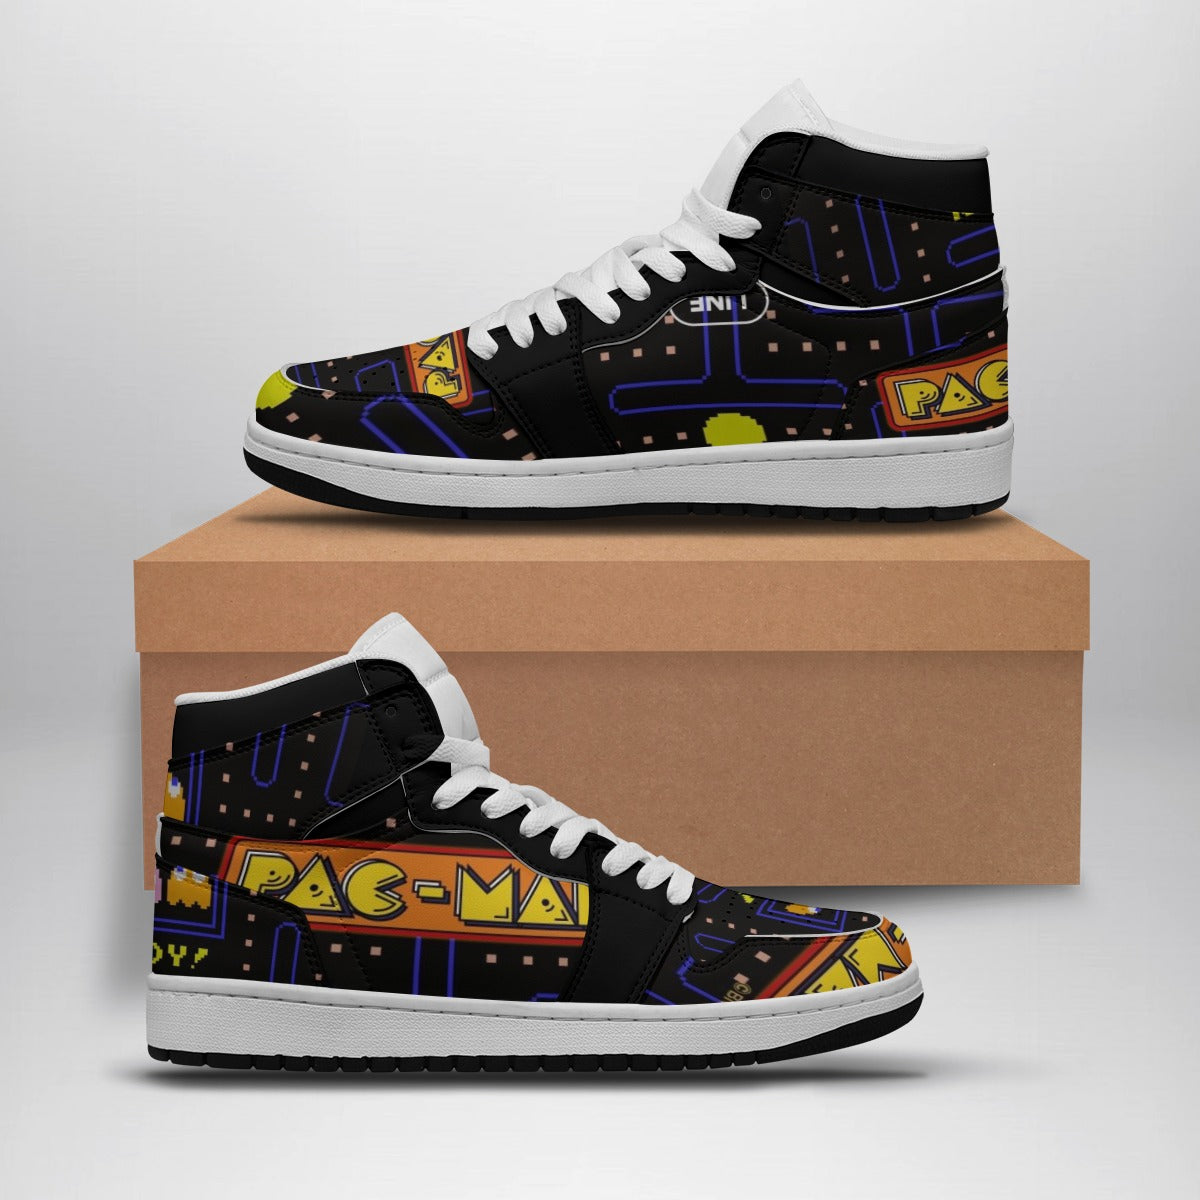 Men's PAC-MAN Synthetic Leather Stitching Sneaks